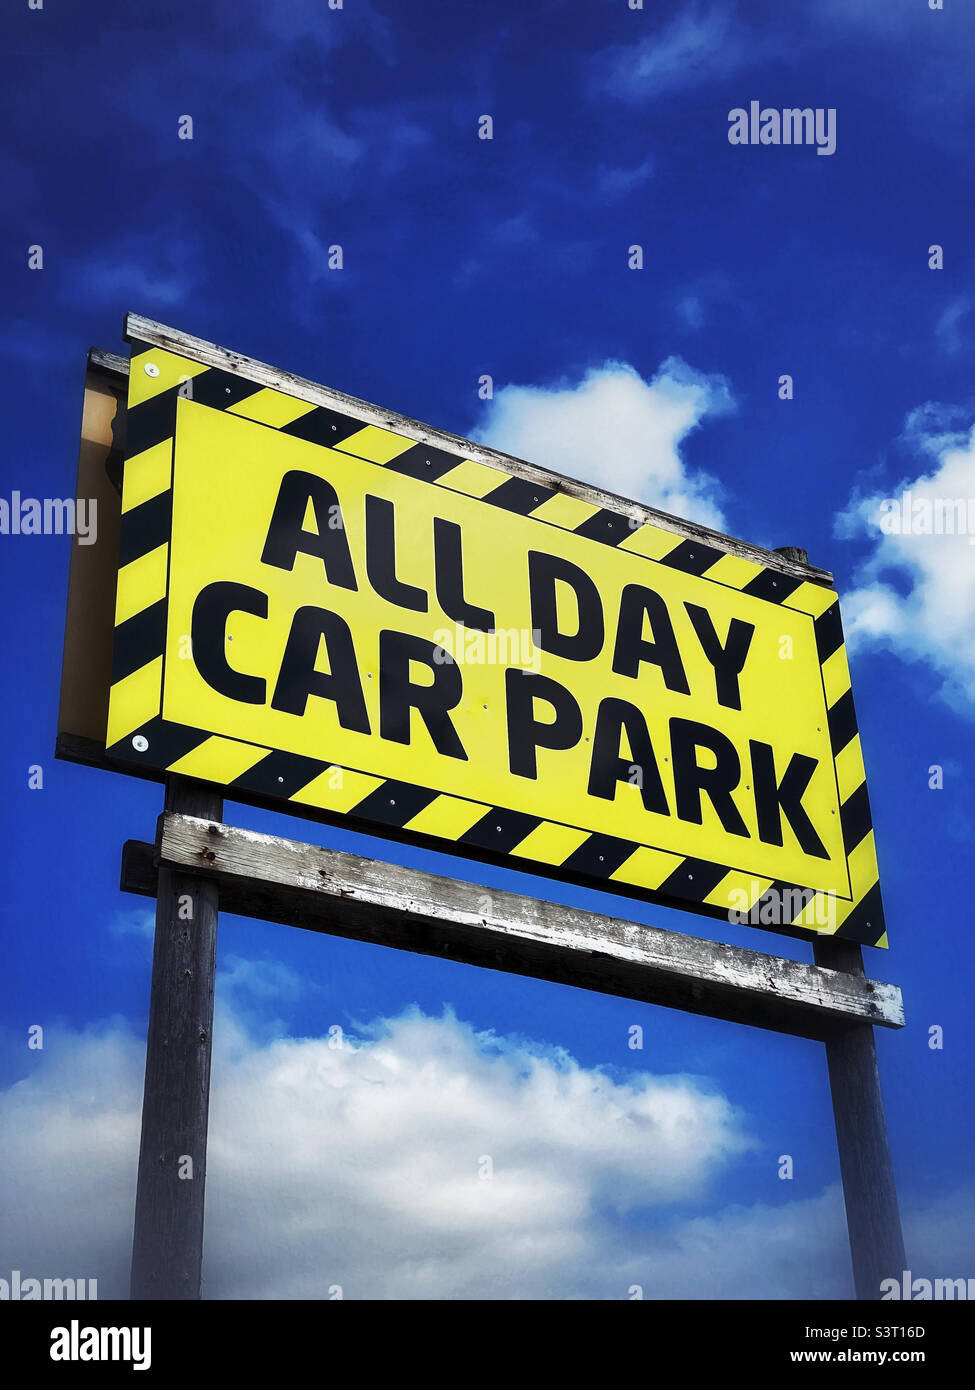 “ALL DAY CAR PARK” A large sign at a seaside town somewhere in Europe. Photo ©️ COLIN HOSKINS. Stock Photo